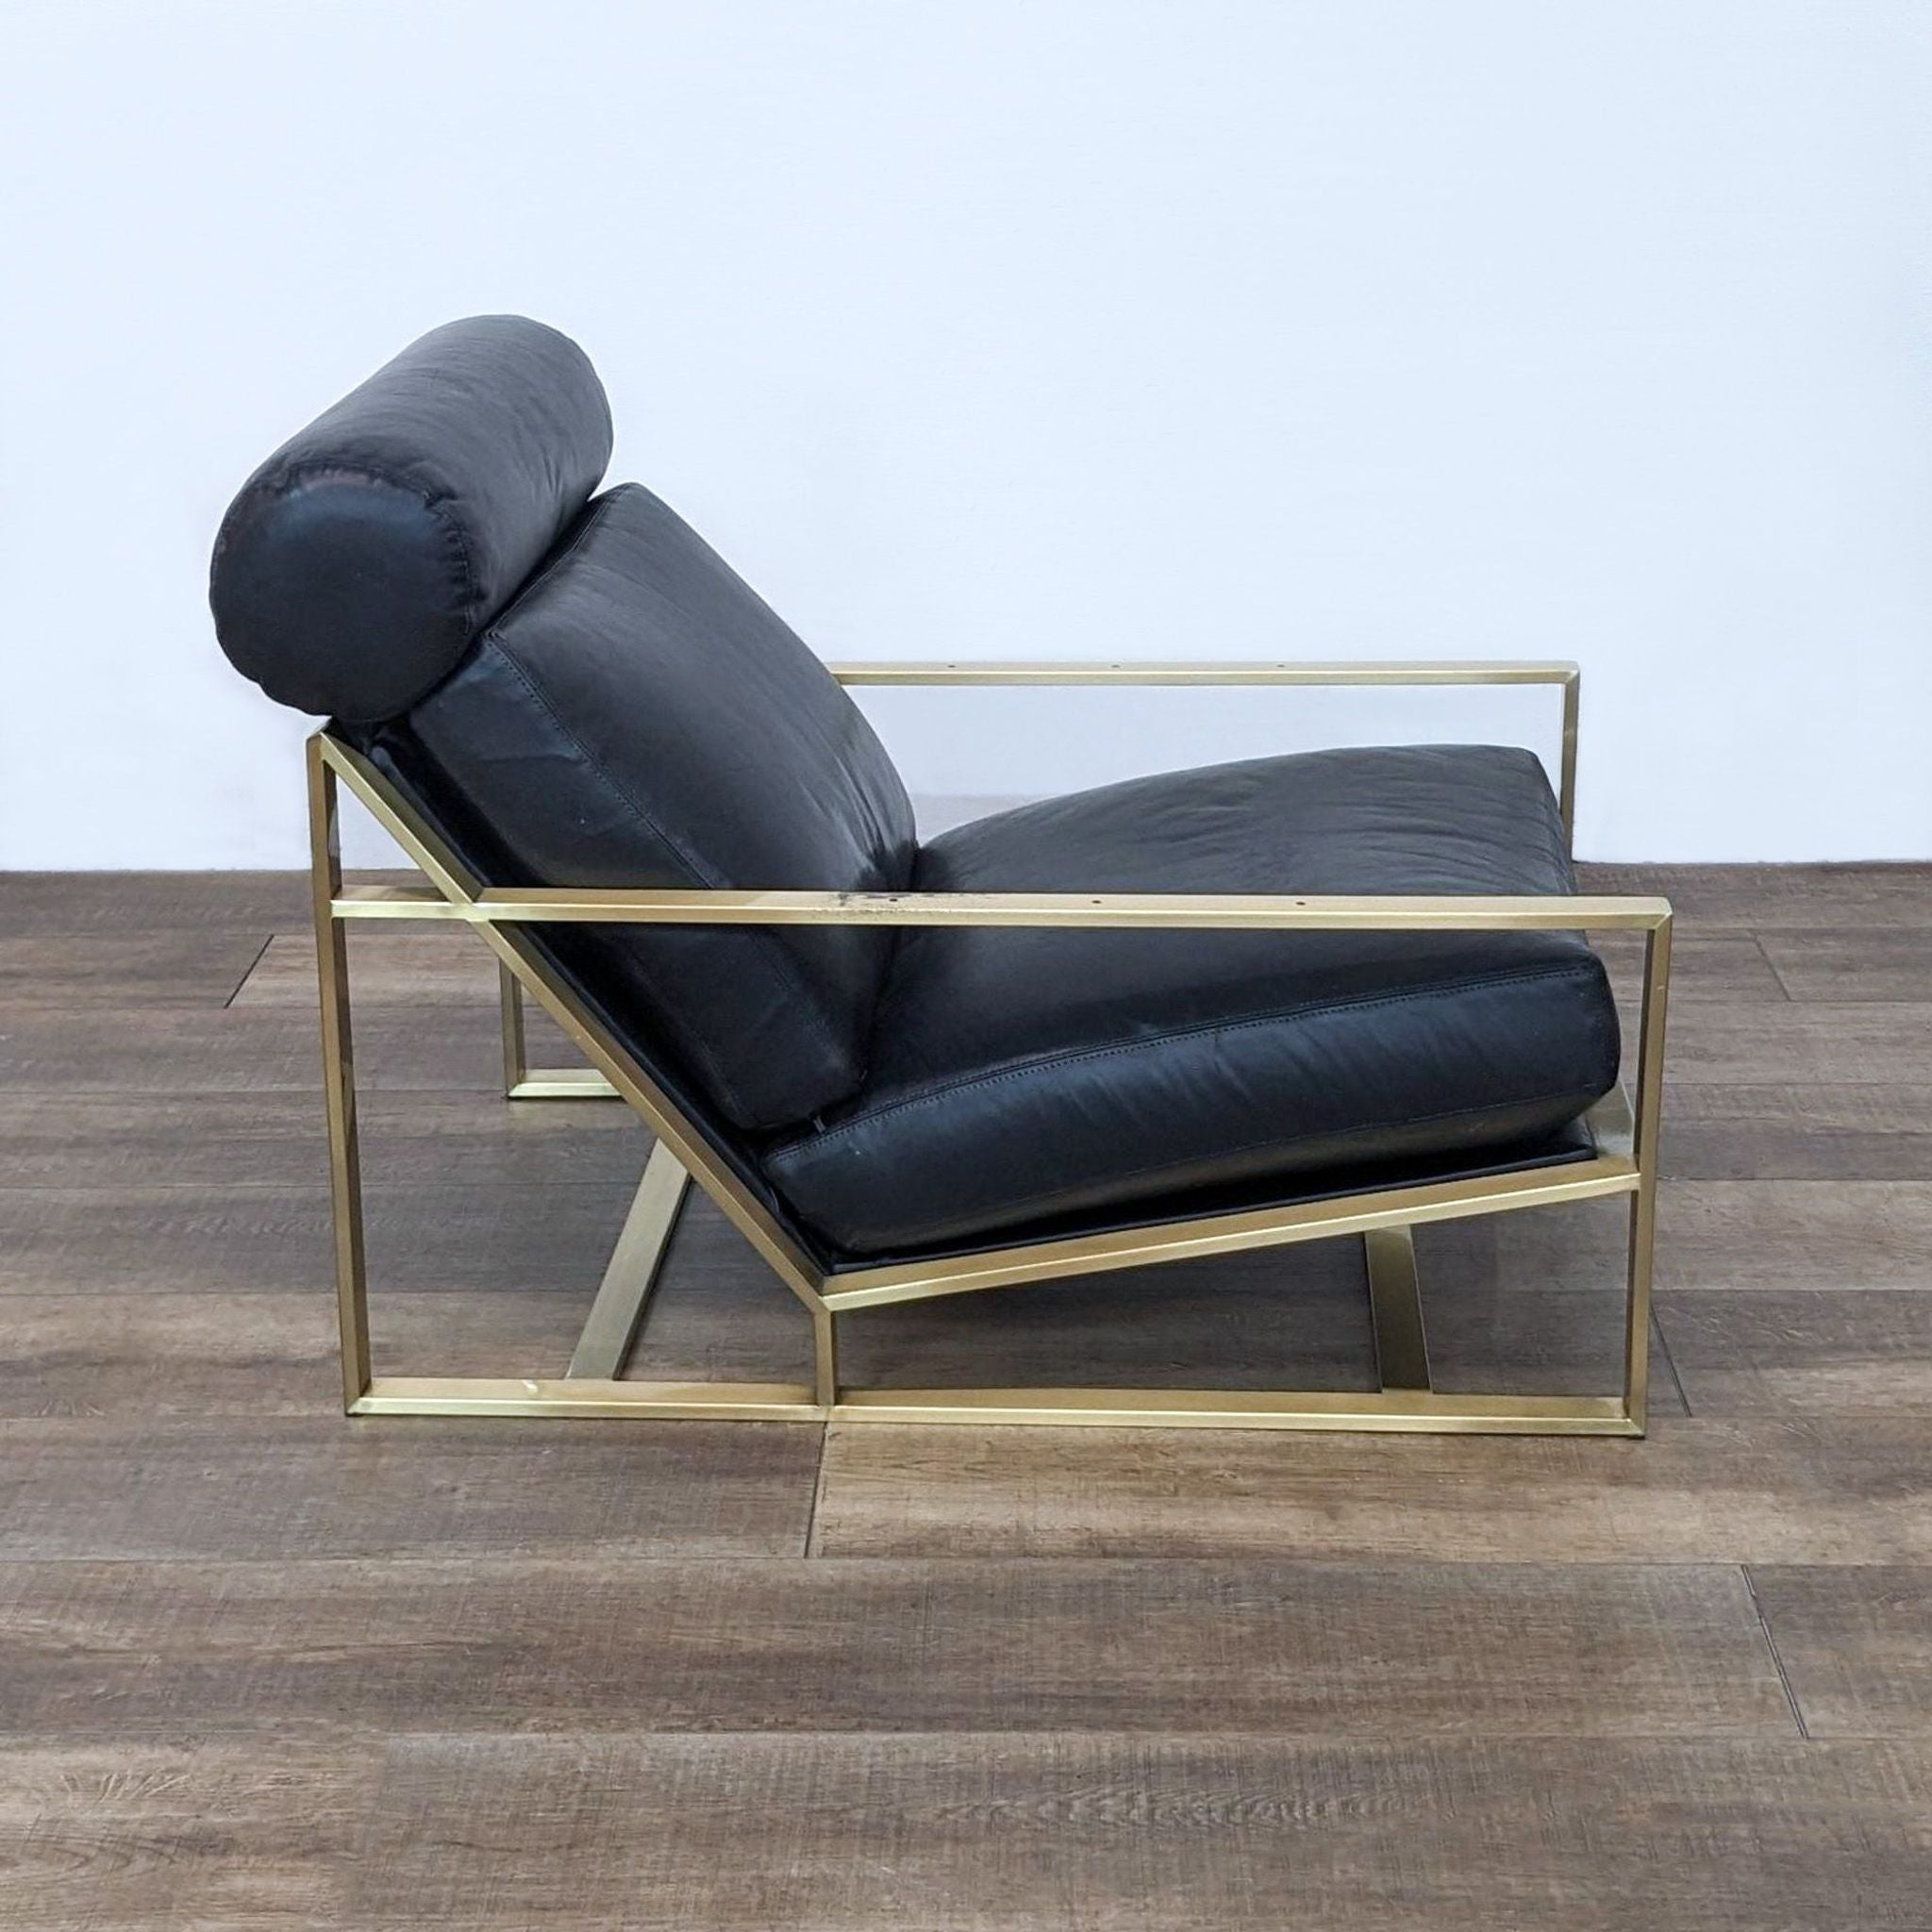 Alt text 2: Iconic midcentury modern Cruisin' lounge chair by Milo Baughman, angled view, showcasing its bronze steel frame and luxurious leather.